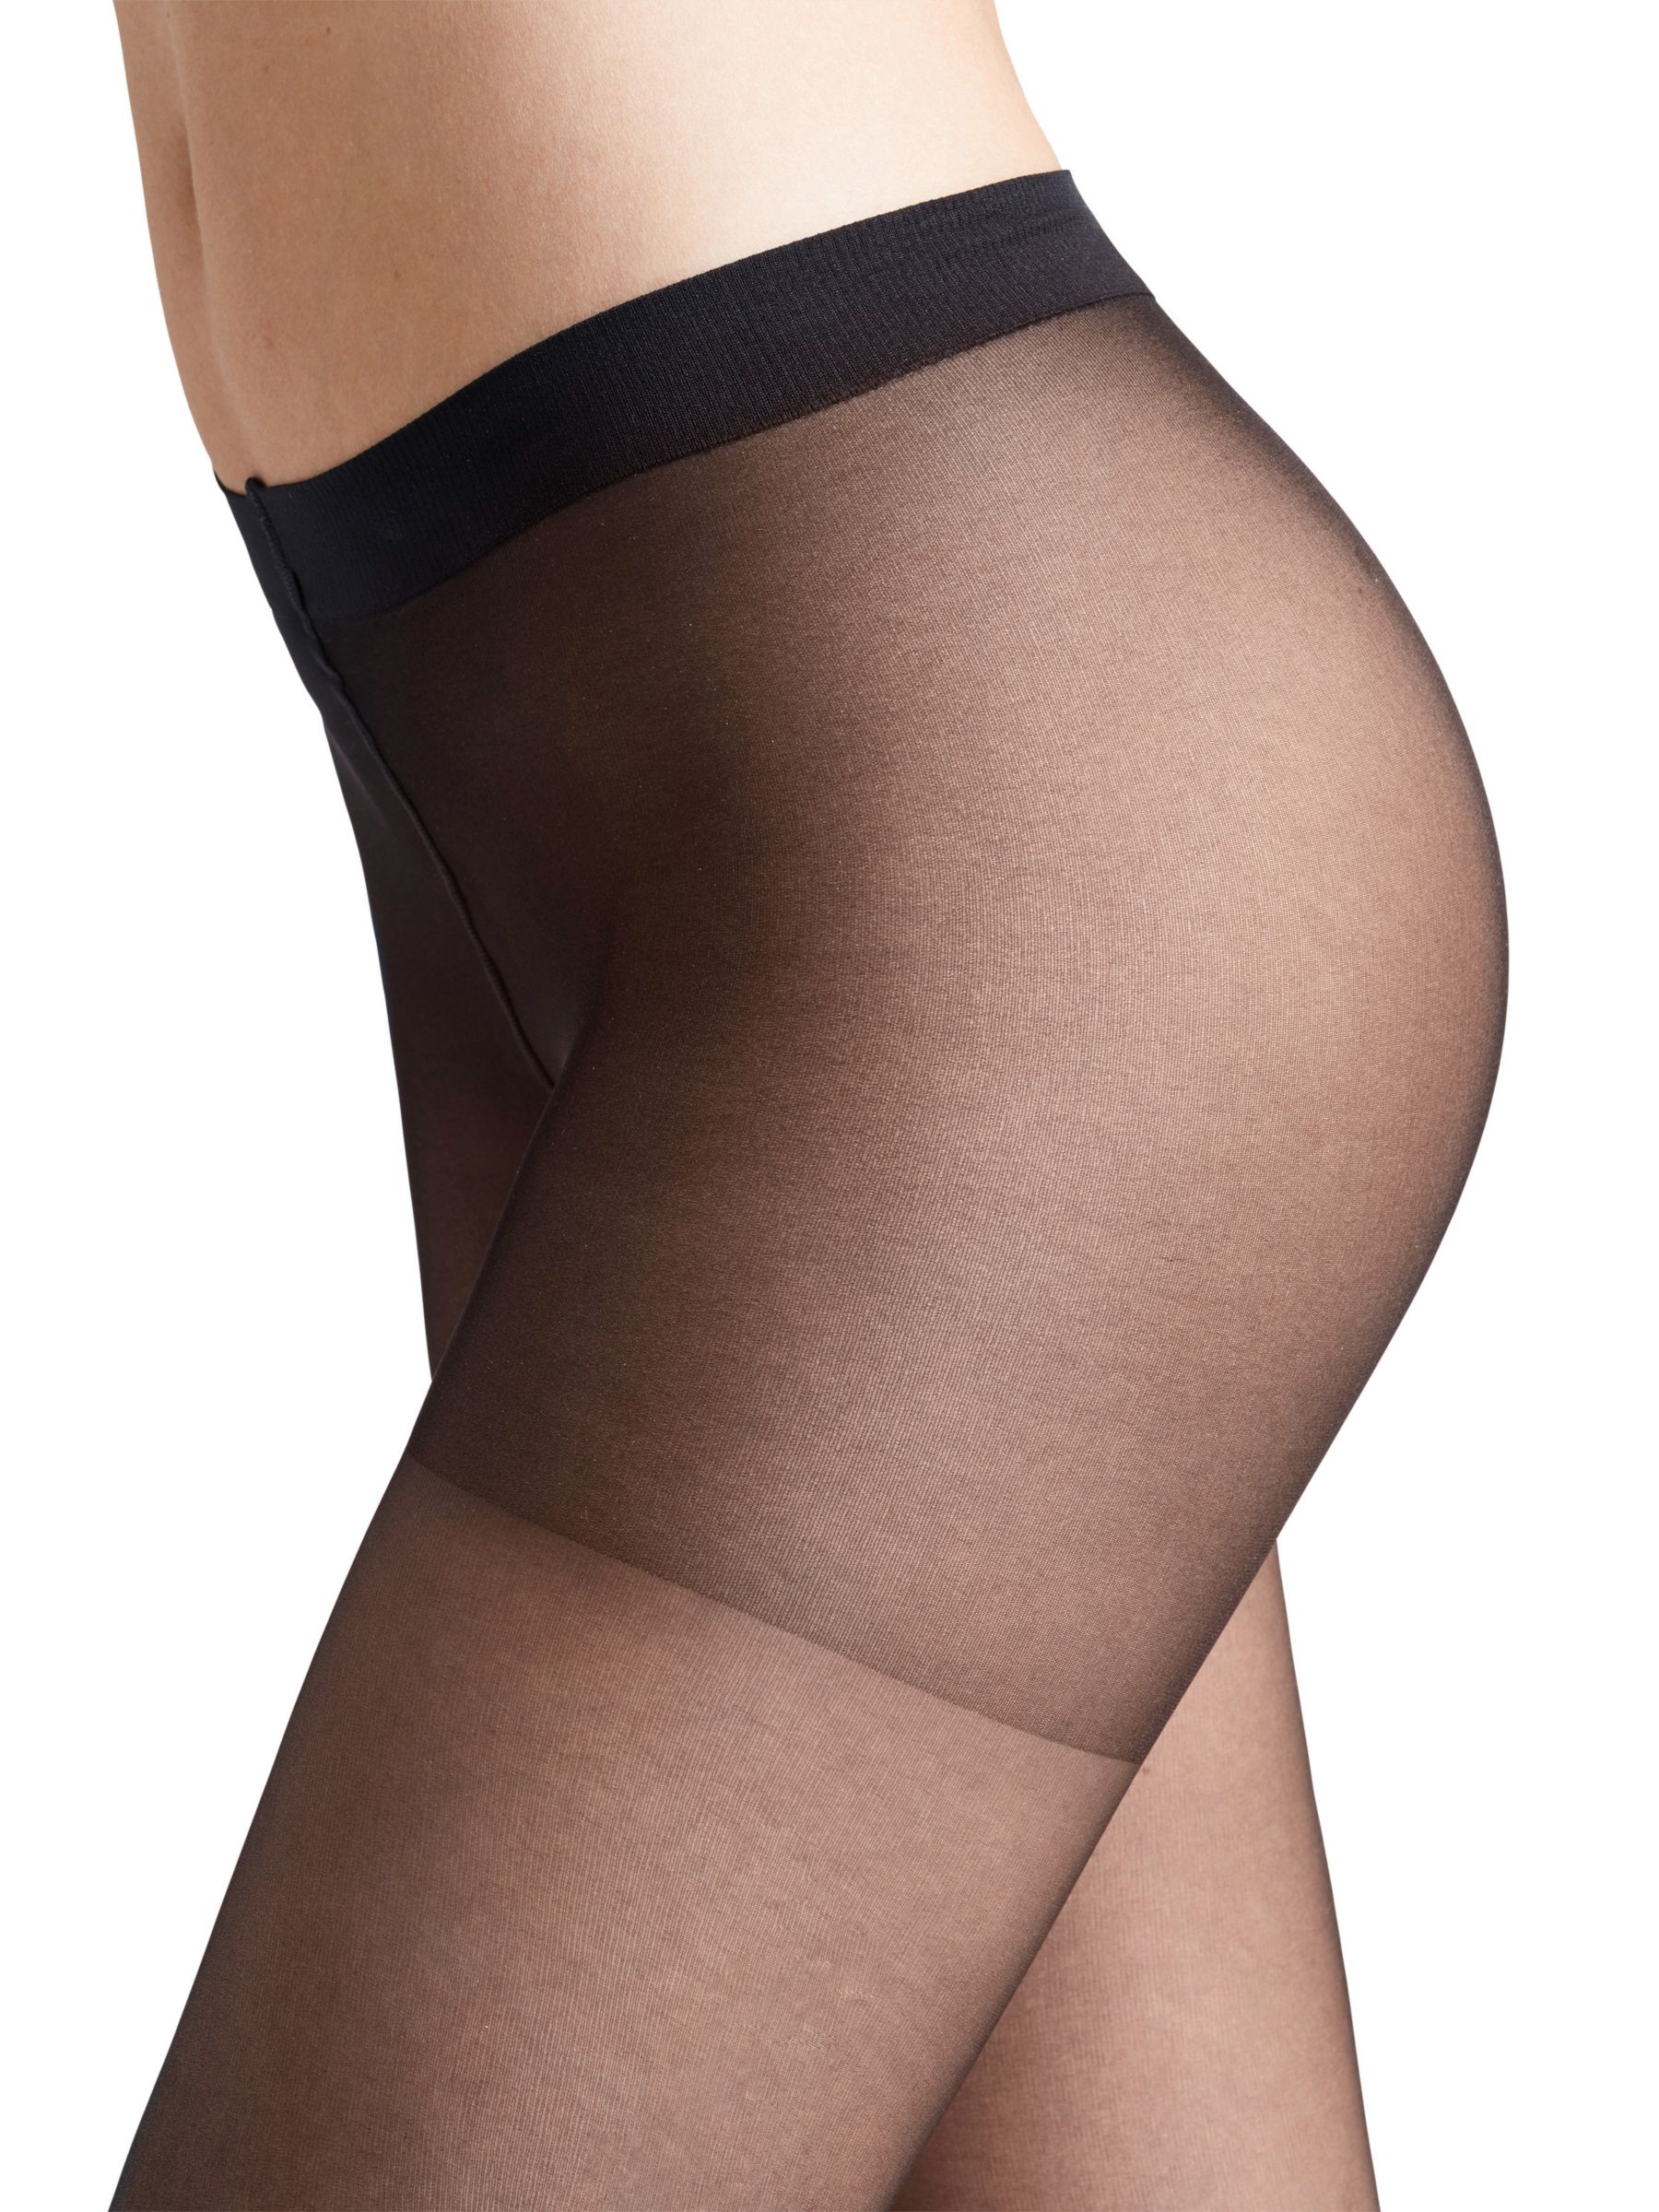 FALKE 8 Denier Invisible Deluxe Tights, Black at John Lewis & Partners